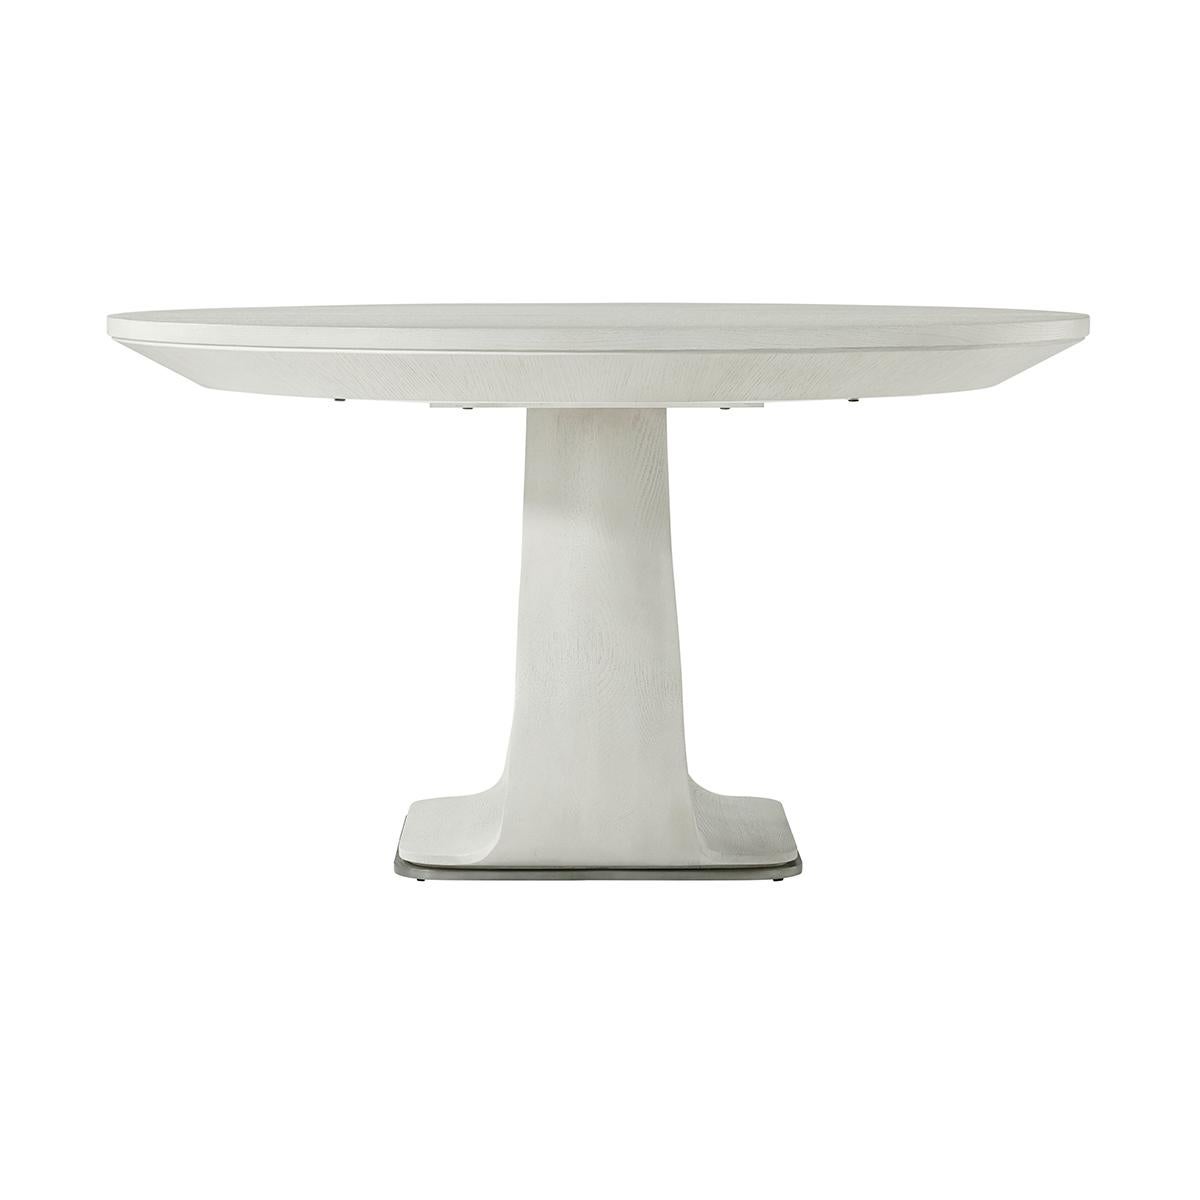 Wood Organic Modern White Round Extending Dining Table For Sale